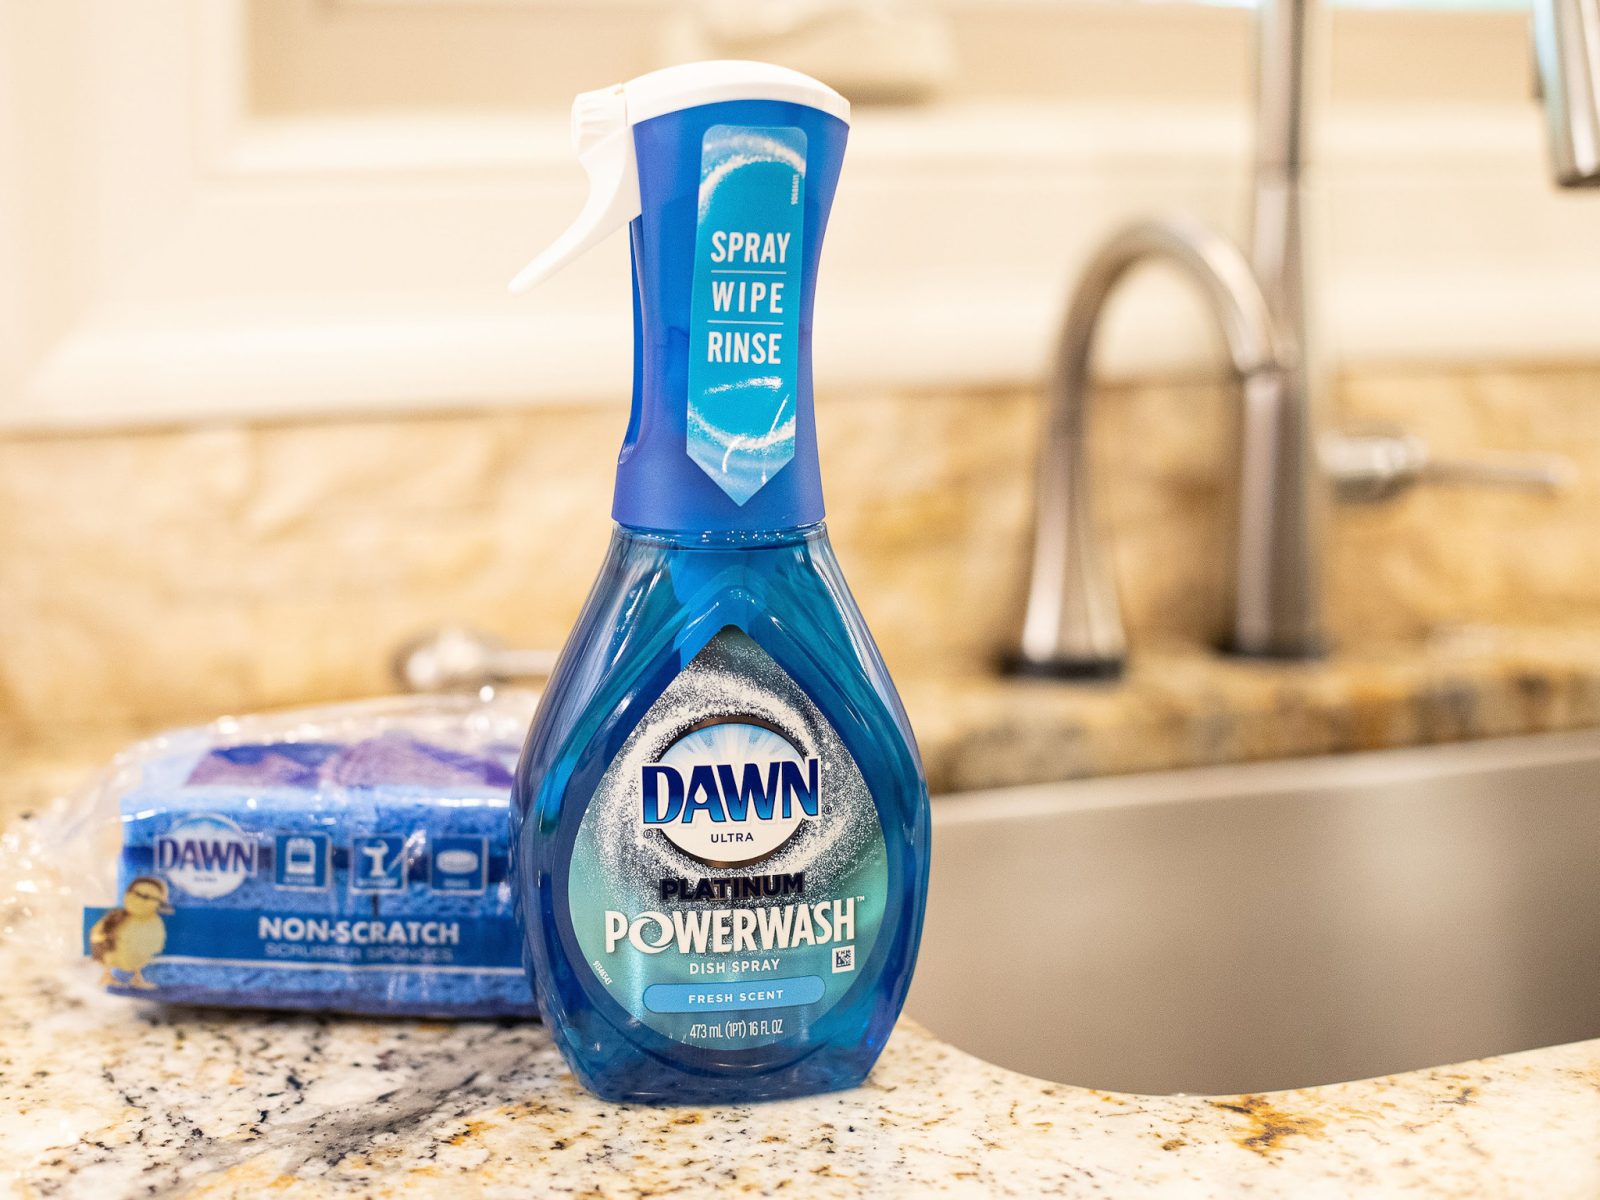 New Dawn Powerwash Coupon For The Publix Sale- Just $2.50 Per Bottle (Plus Discounted Dawn Wipes)